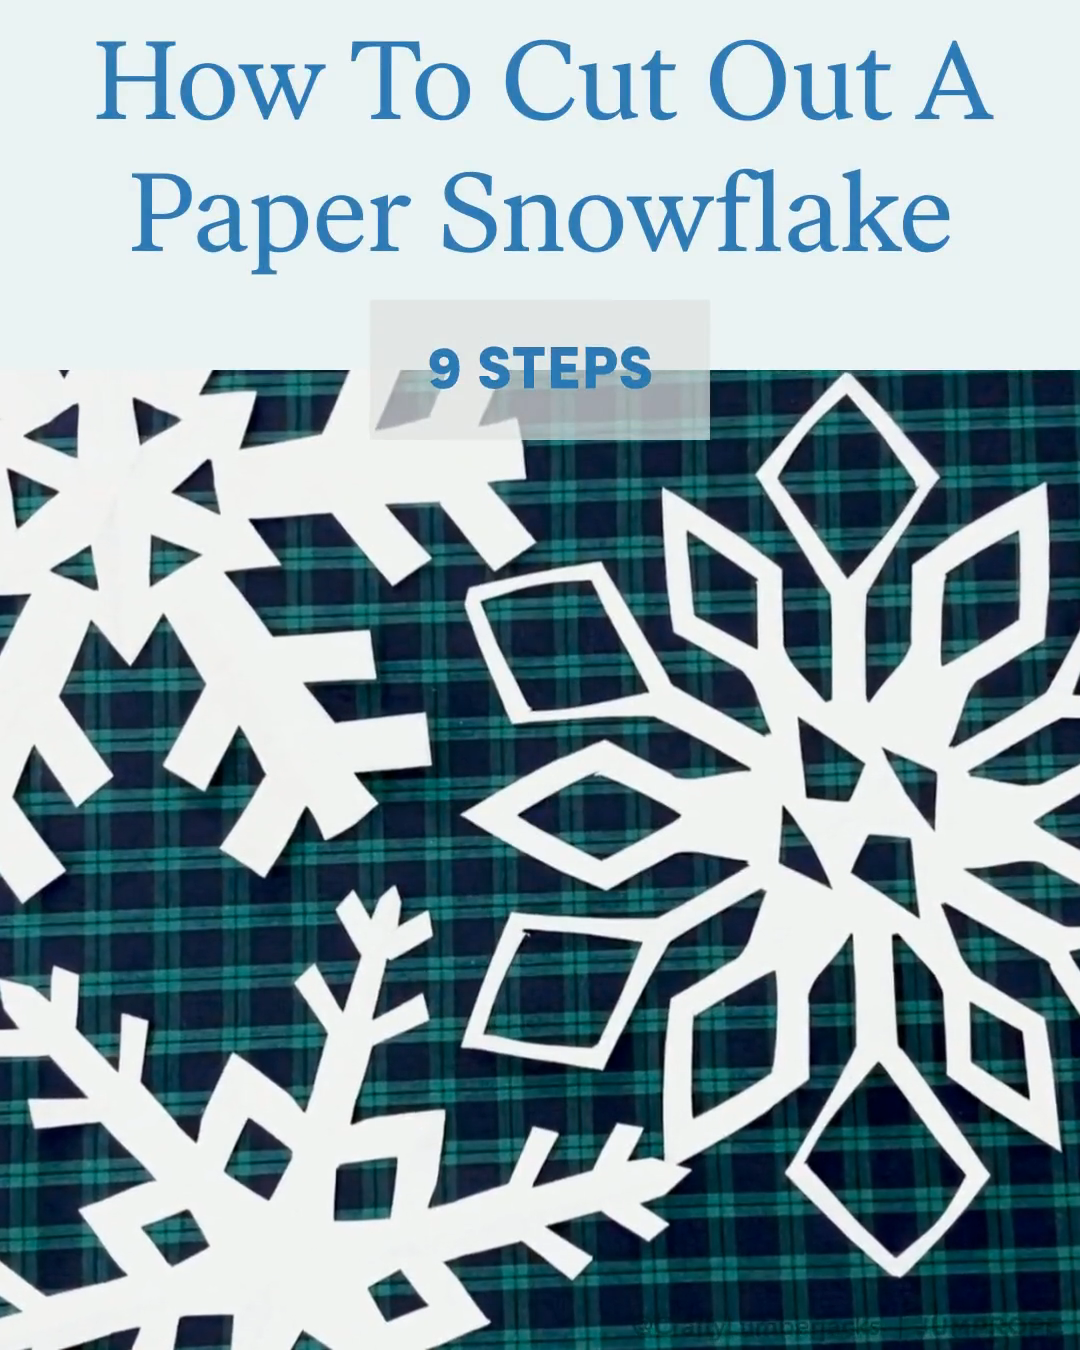 How To Cut Out A Paper Snowflake - How To Cut Out A Paper Snowflake -   17 diy Christmas Decorations snowflakes ideas